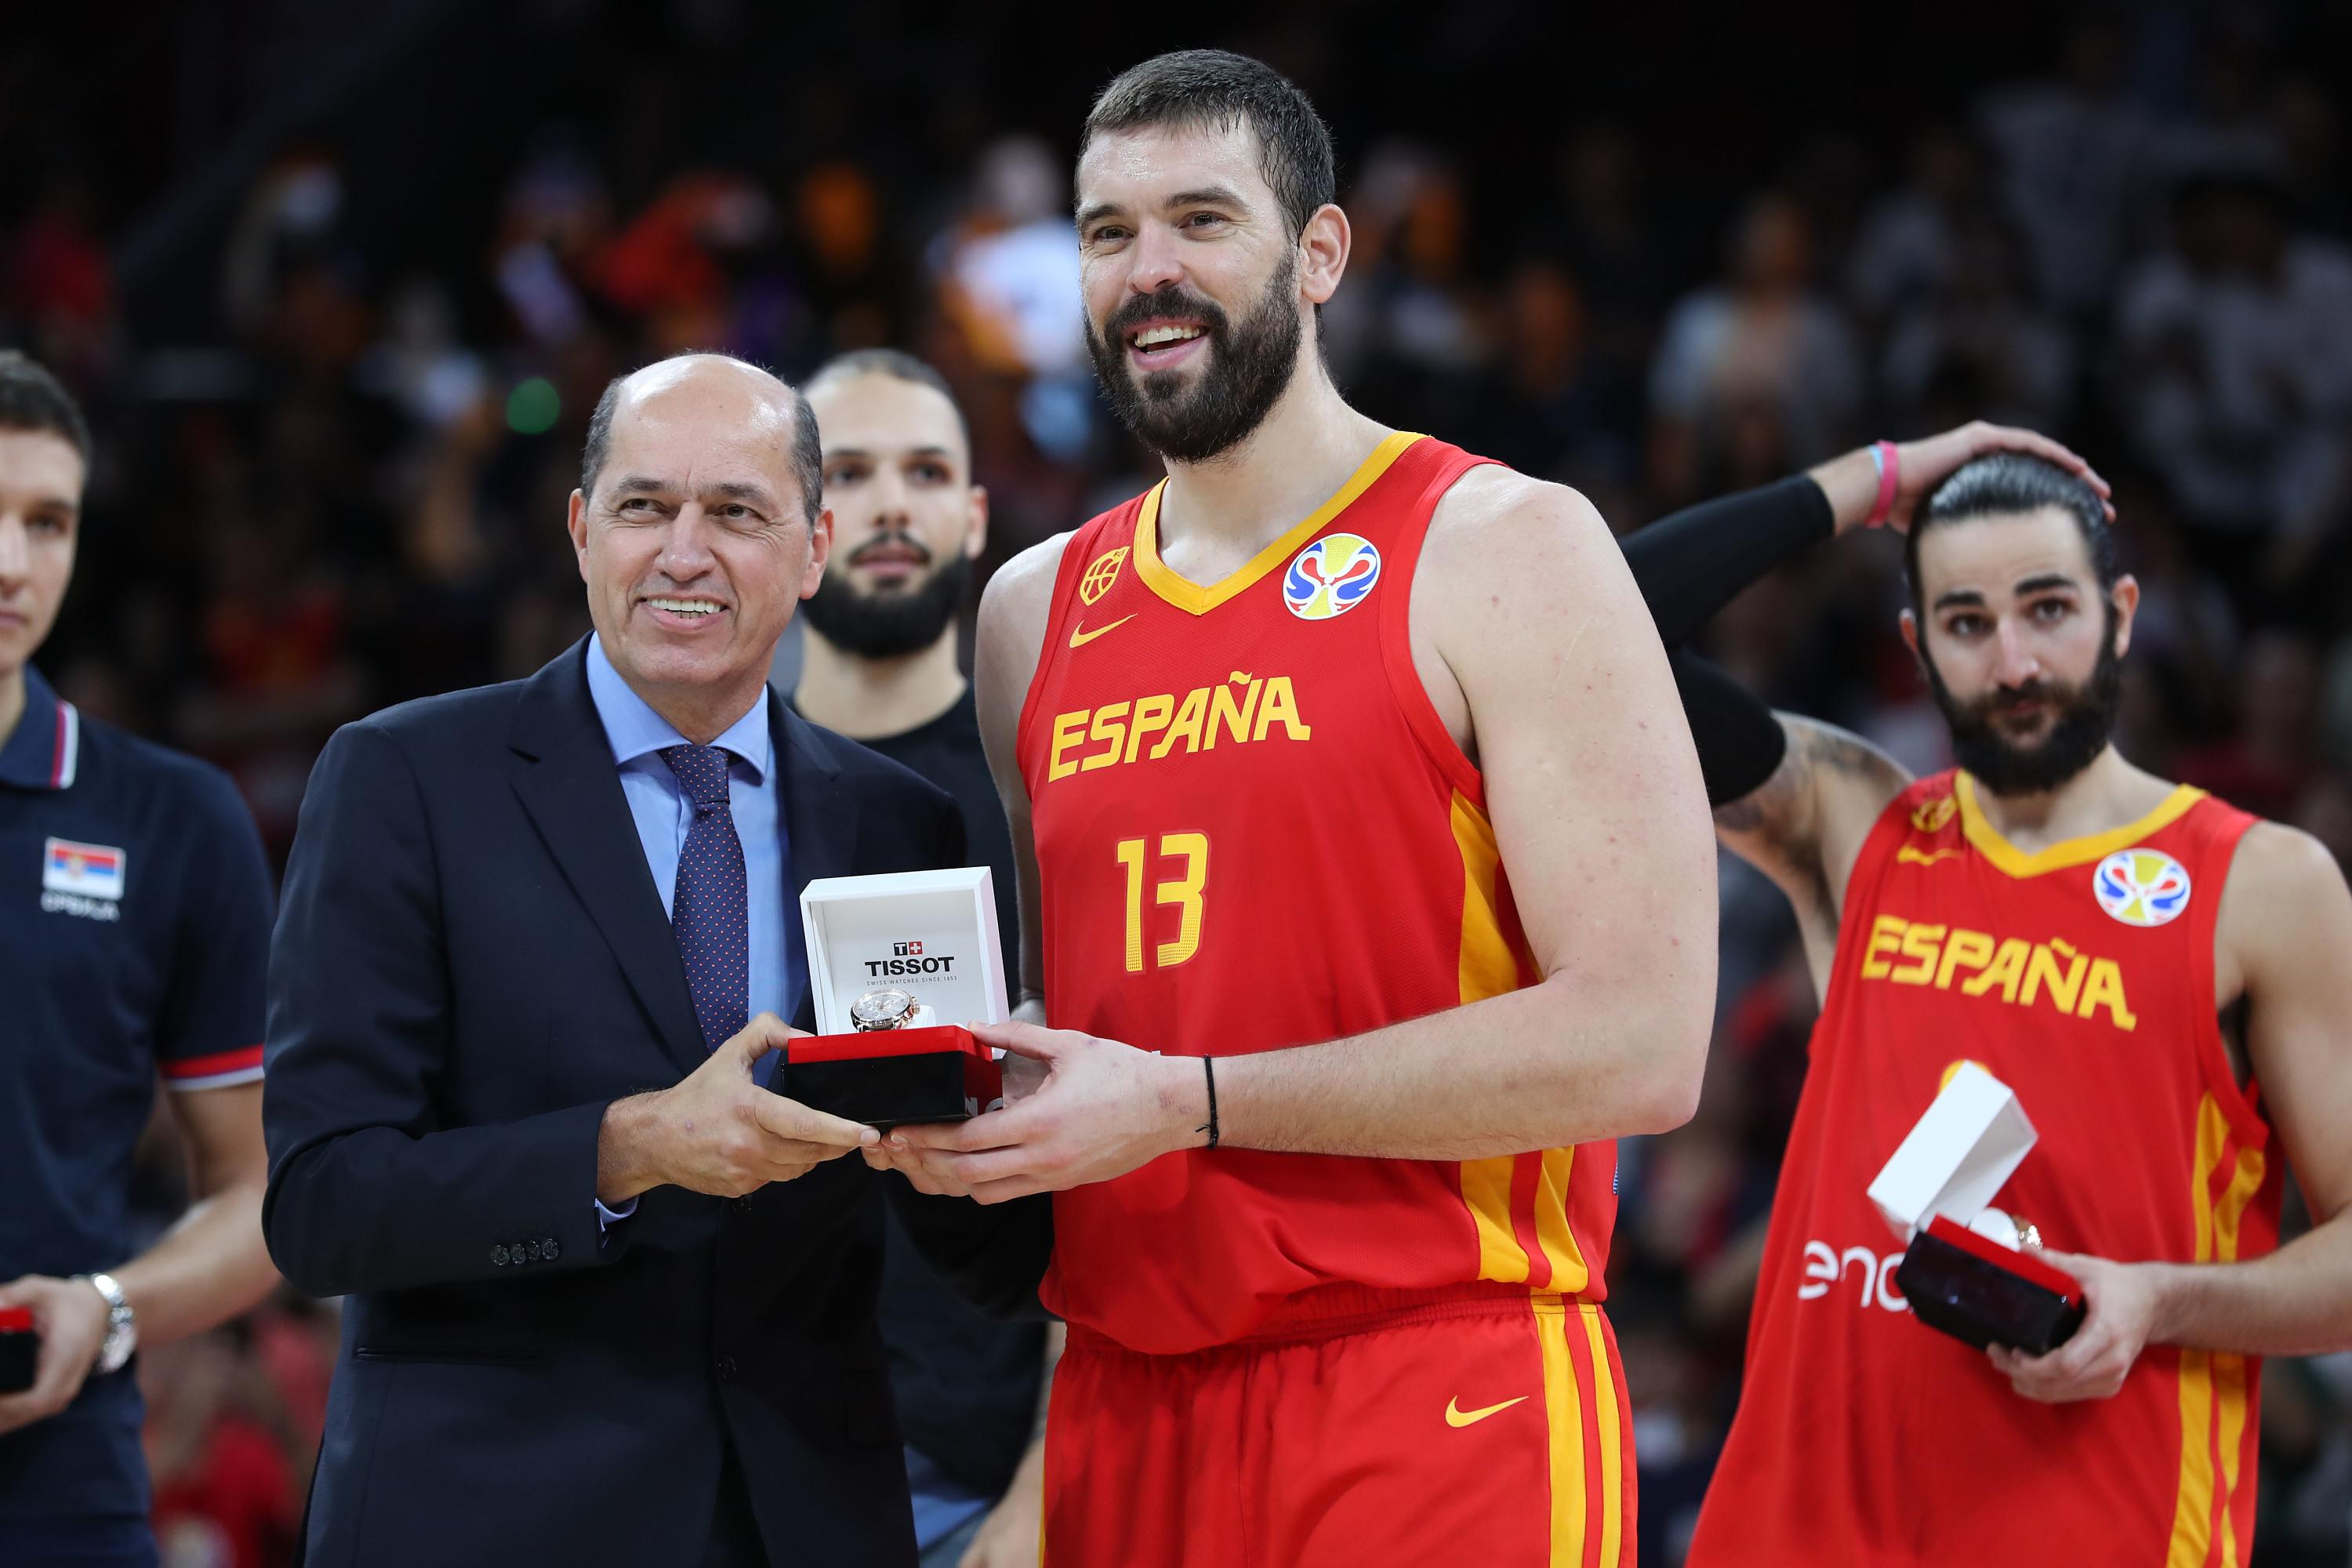 “The time has come for me to take a step back”: at 39, Marc Gasol hangs up